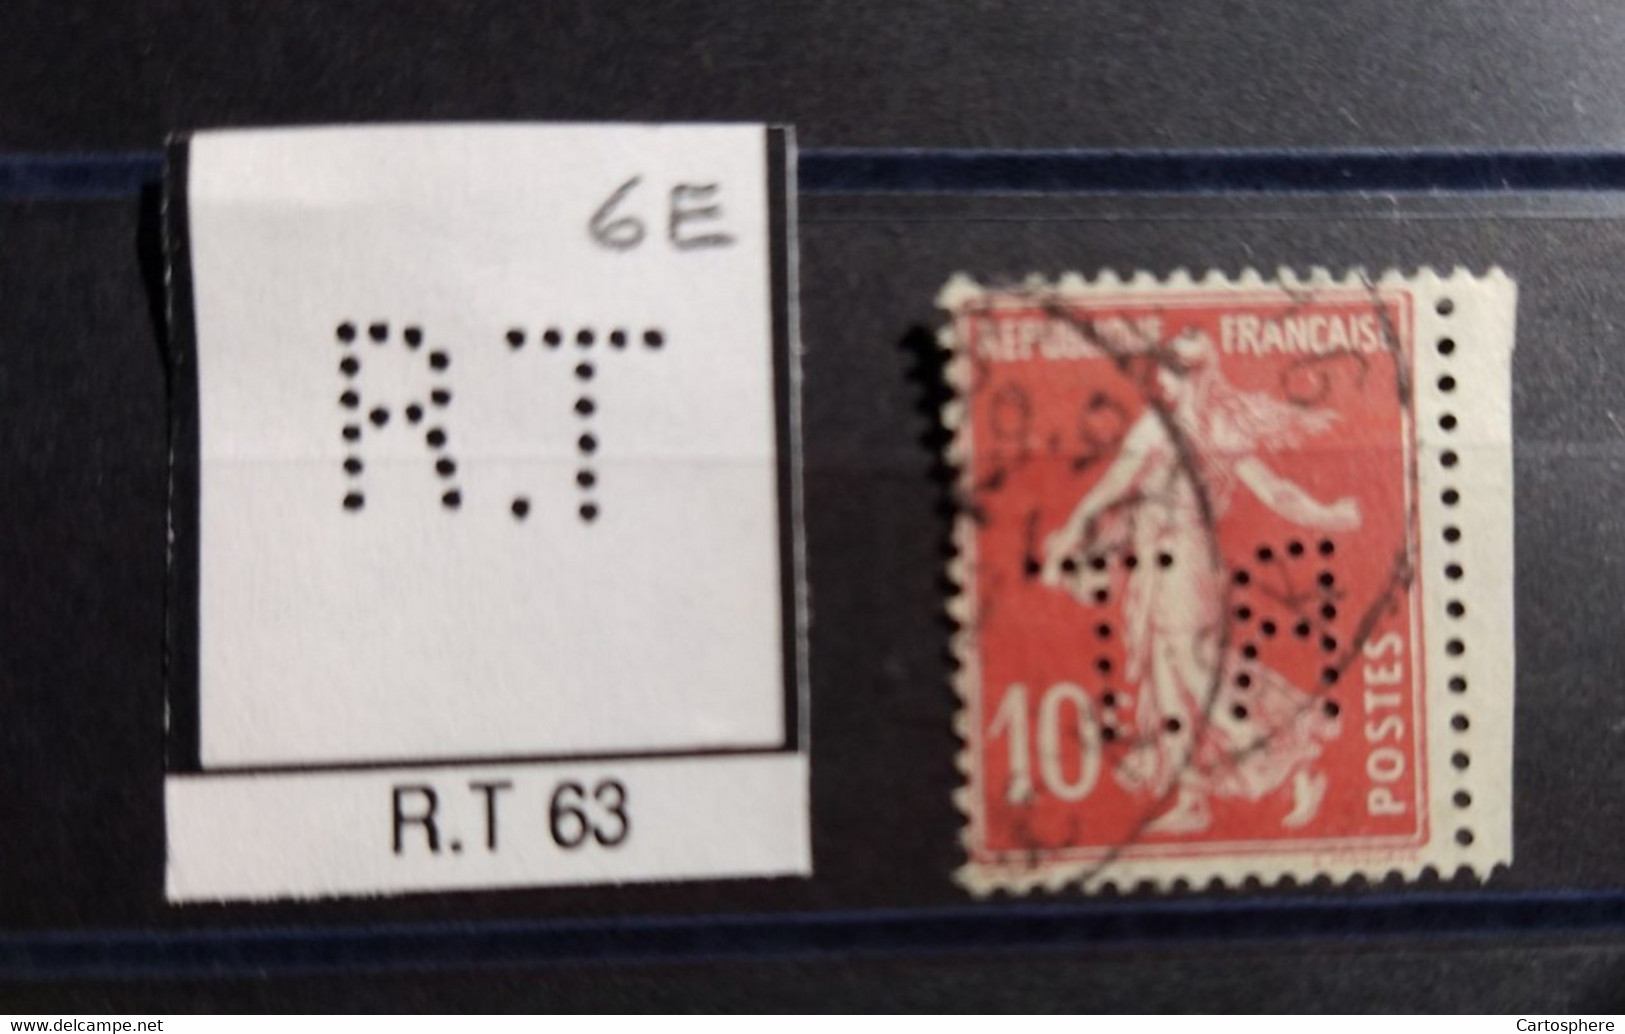 FRANCE TIMBRE RT 63 INDICE 6  SUR 138 PERFORE PERFORES PERFIN PERFINS PERFO PERFORATION PERFORIERT - Oblitérés